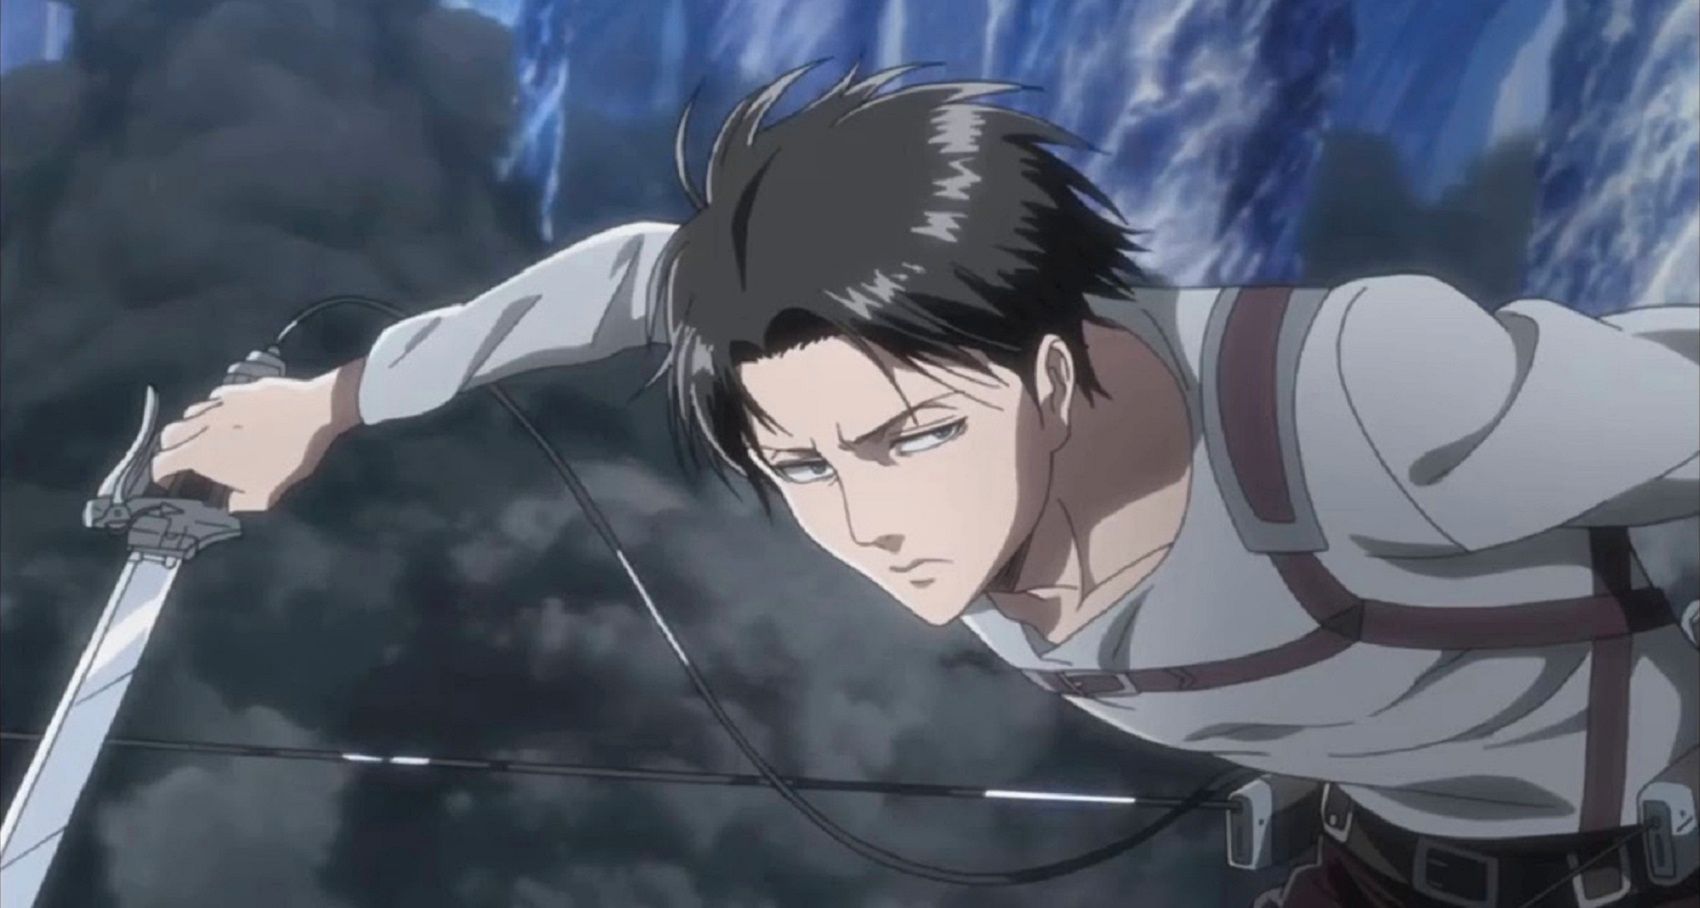 3. "Levi Ackerman from Attack on Titan" - wide 5